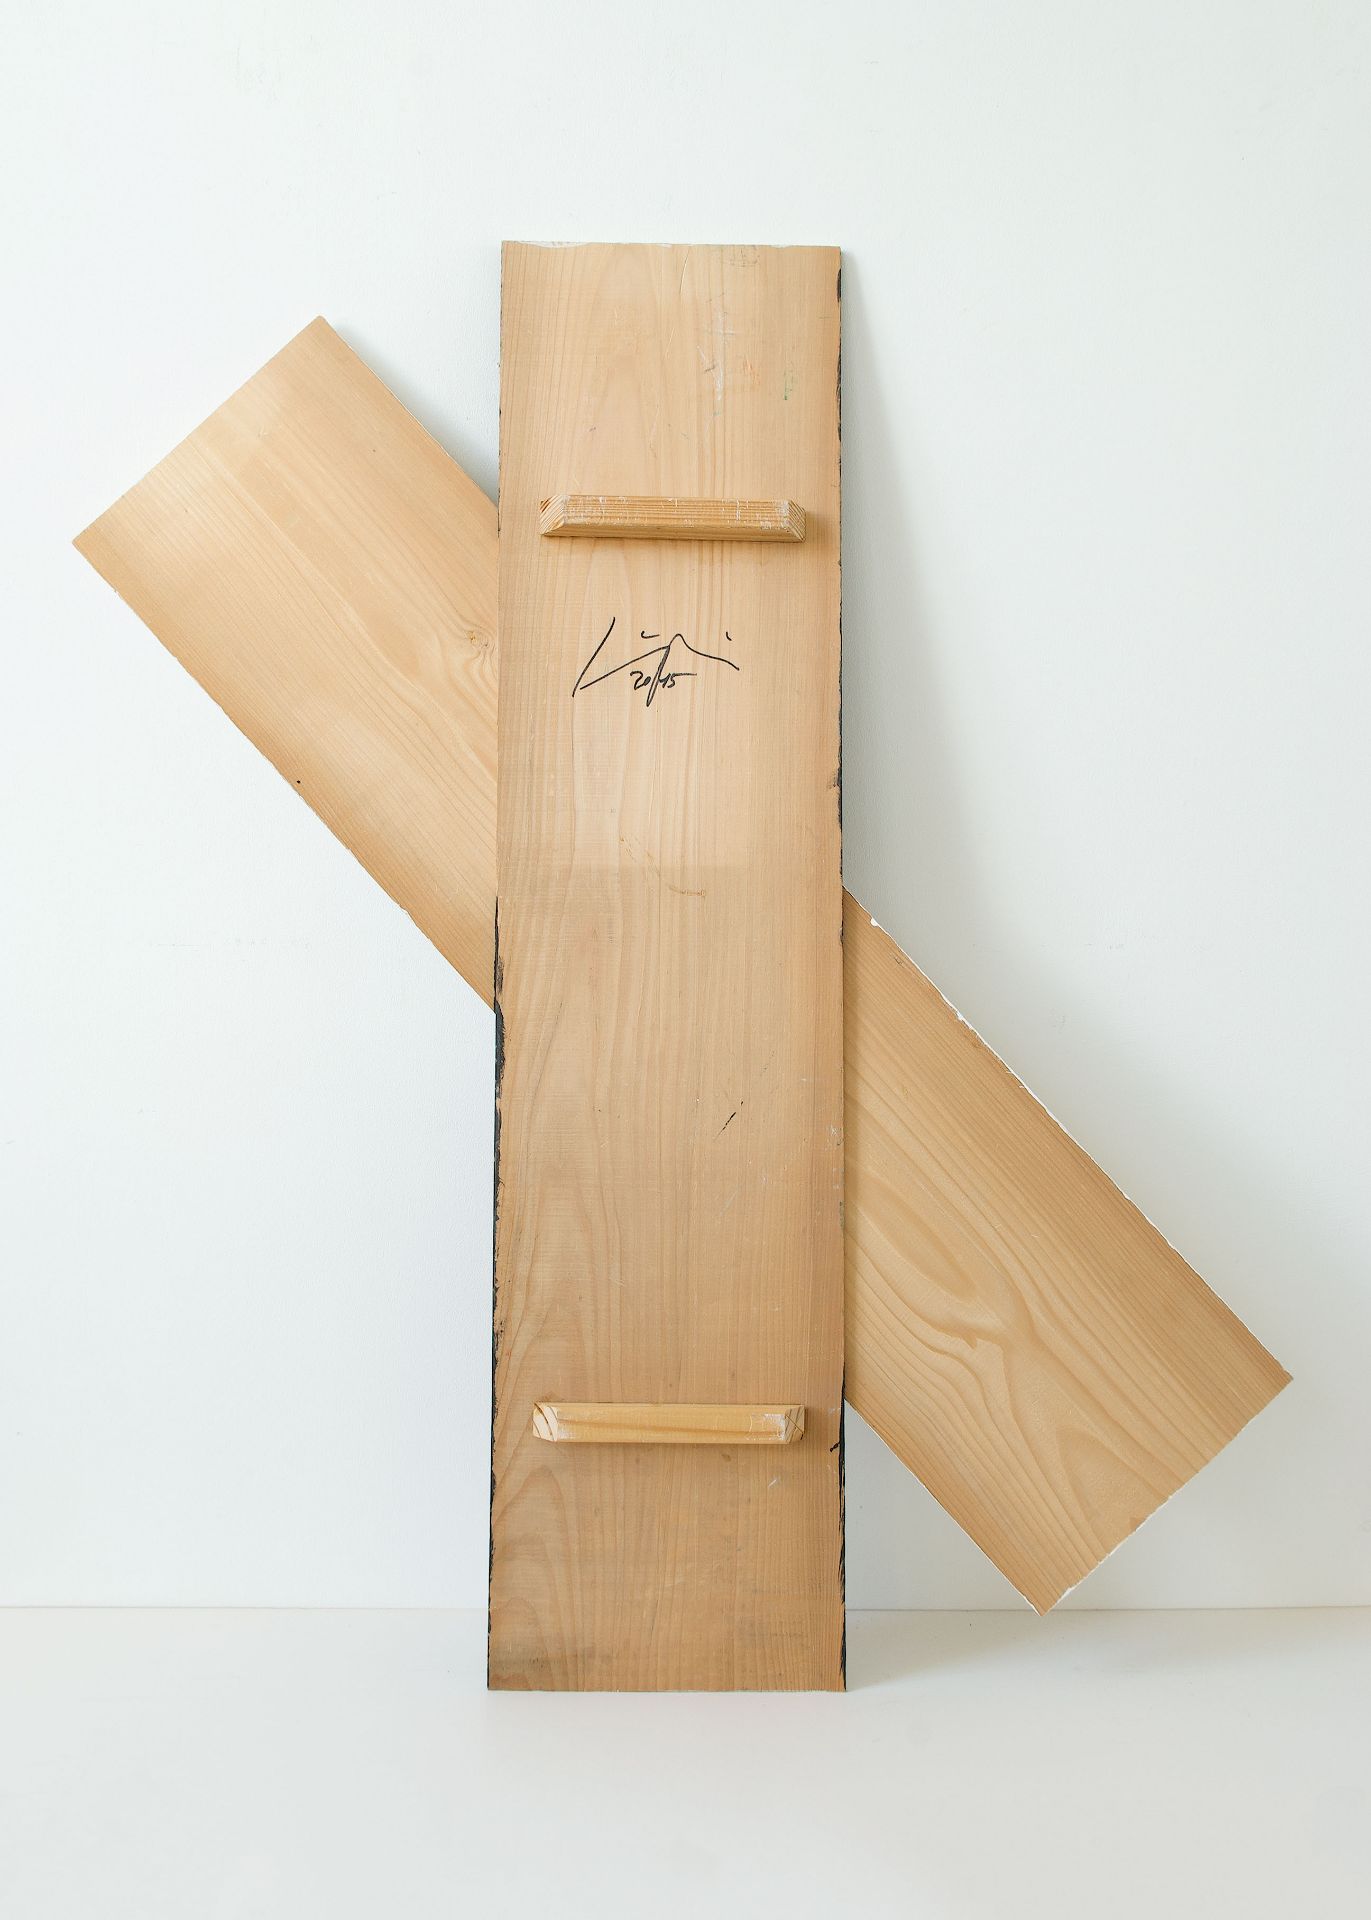 Alfonso Hüppi, Untitled.Casein on panel. 2015. Ca. 121 x 103 x 6 cm. Signed and dated on the - Image 2 of 2